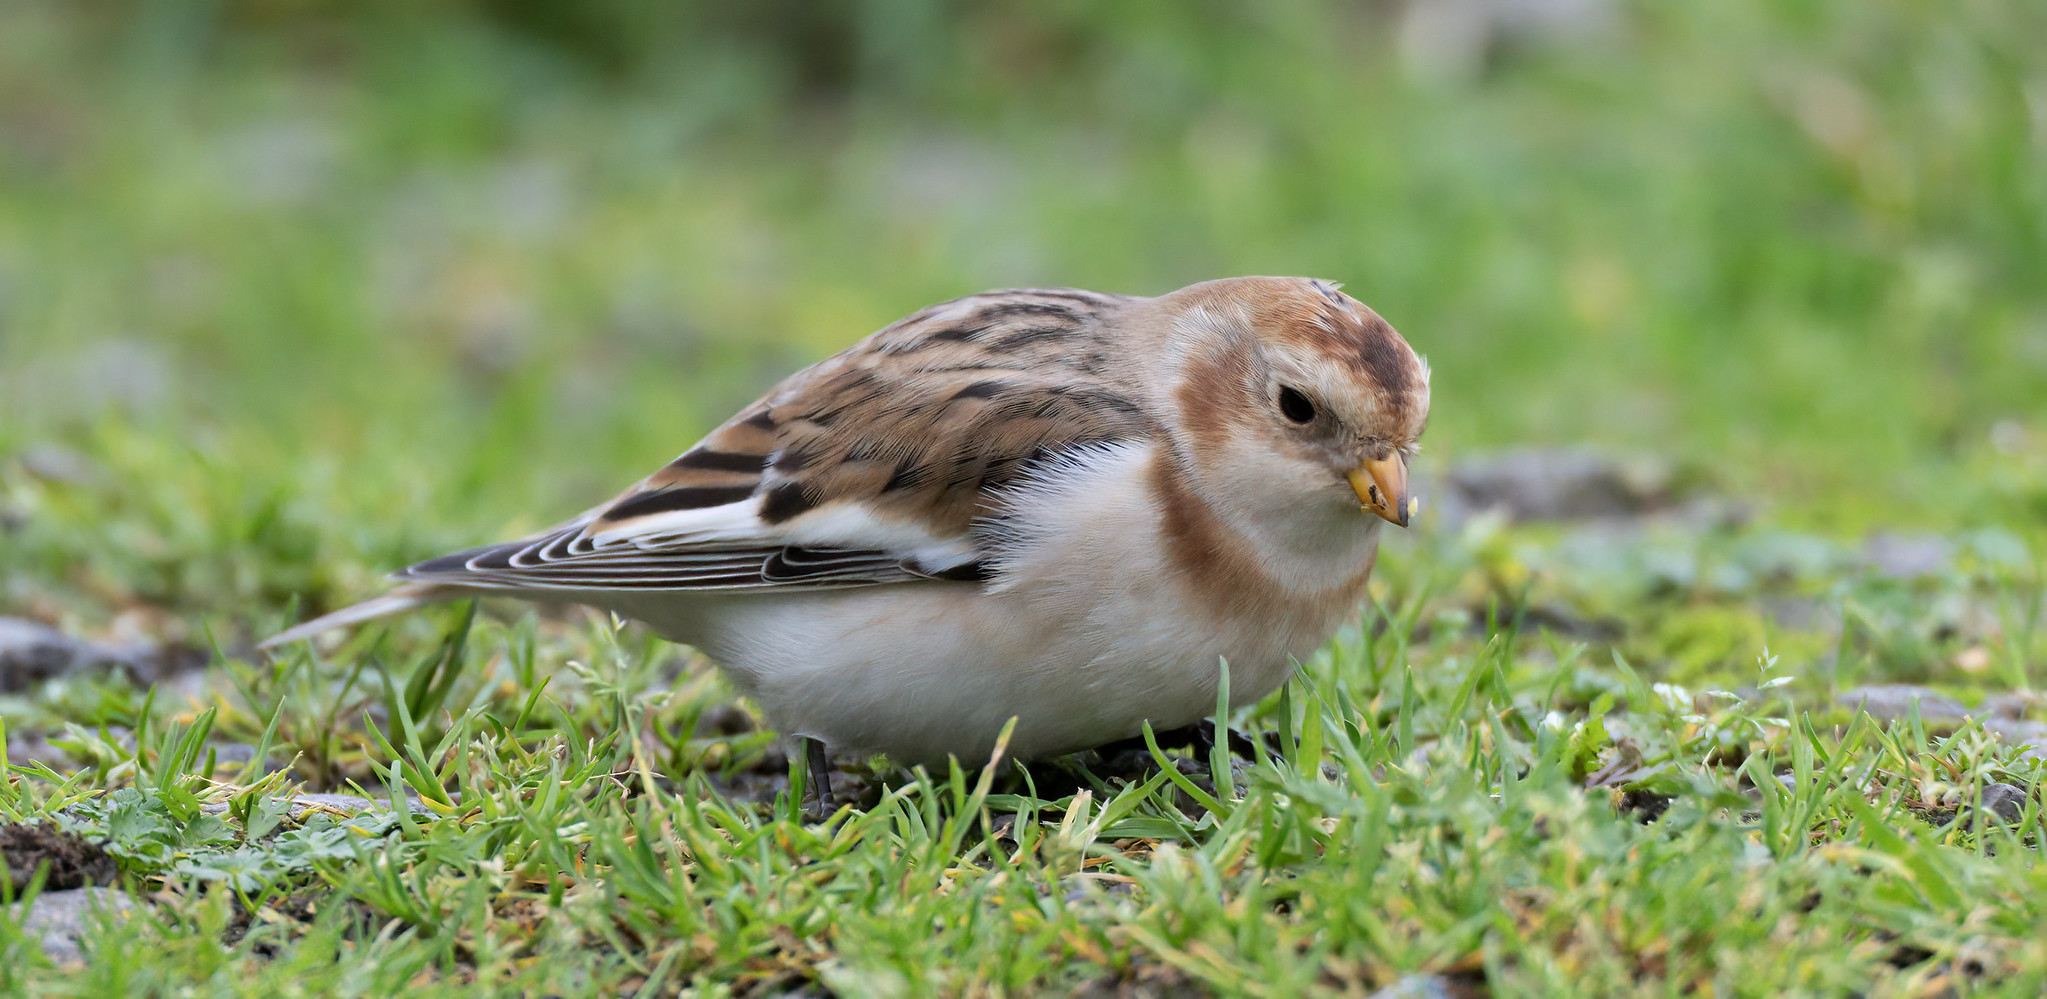 Snow Bunting - 1st winter male